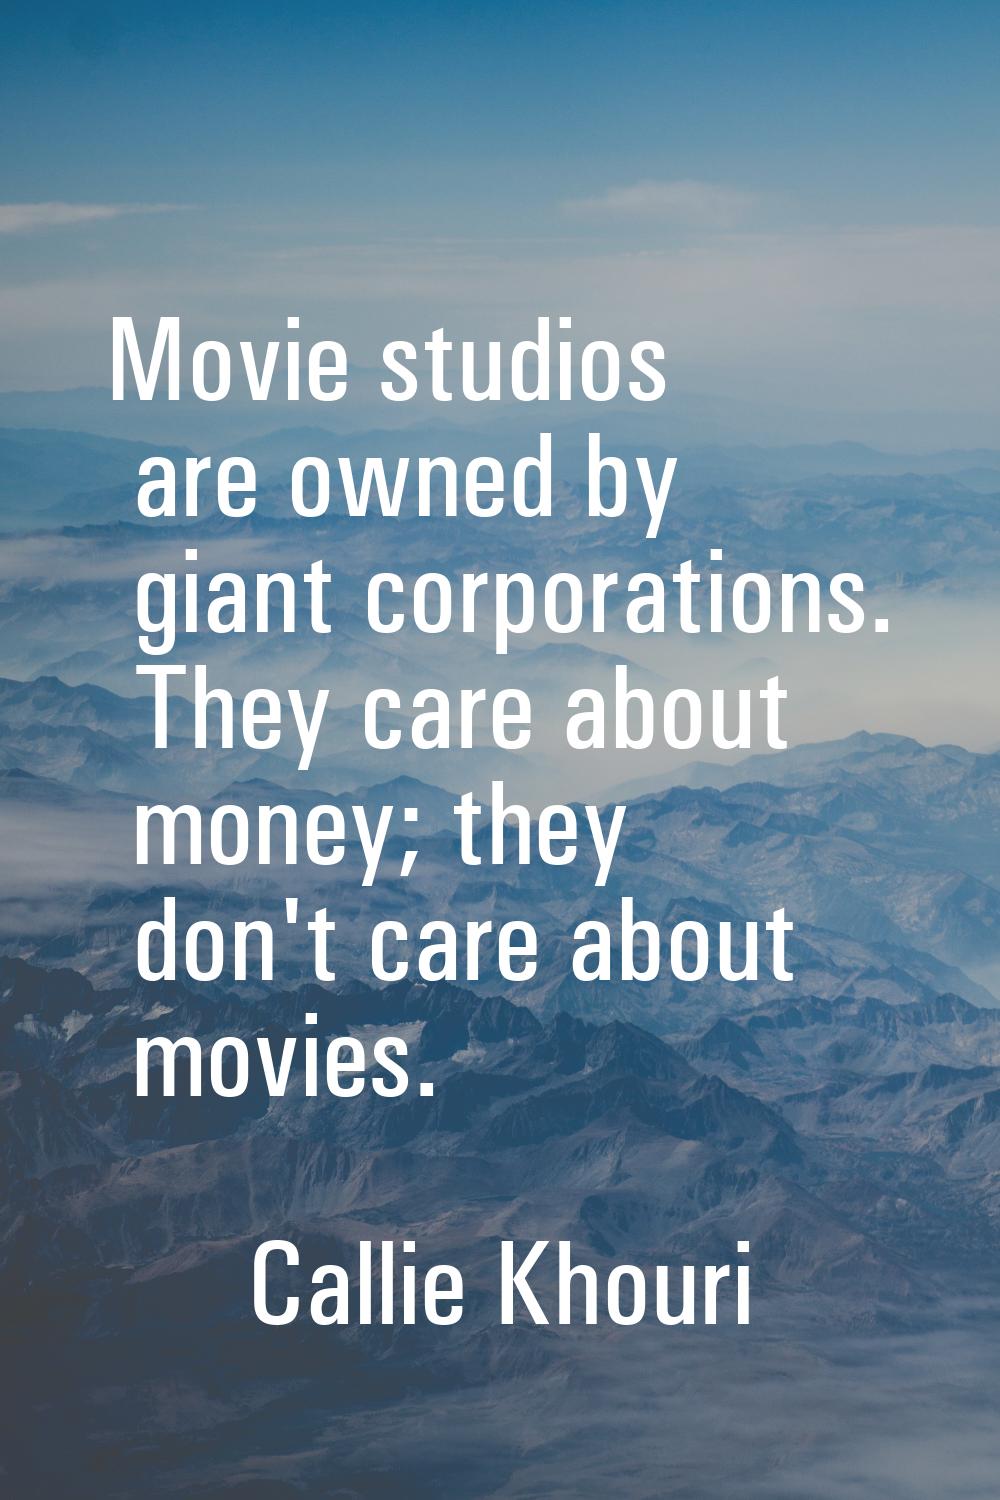 Movie studios are owned by giant corporations. They care about money; they don't care about movies.